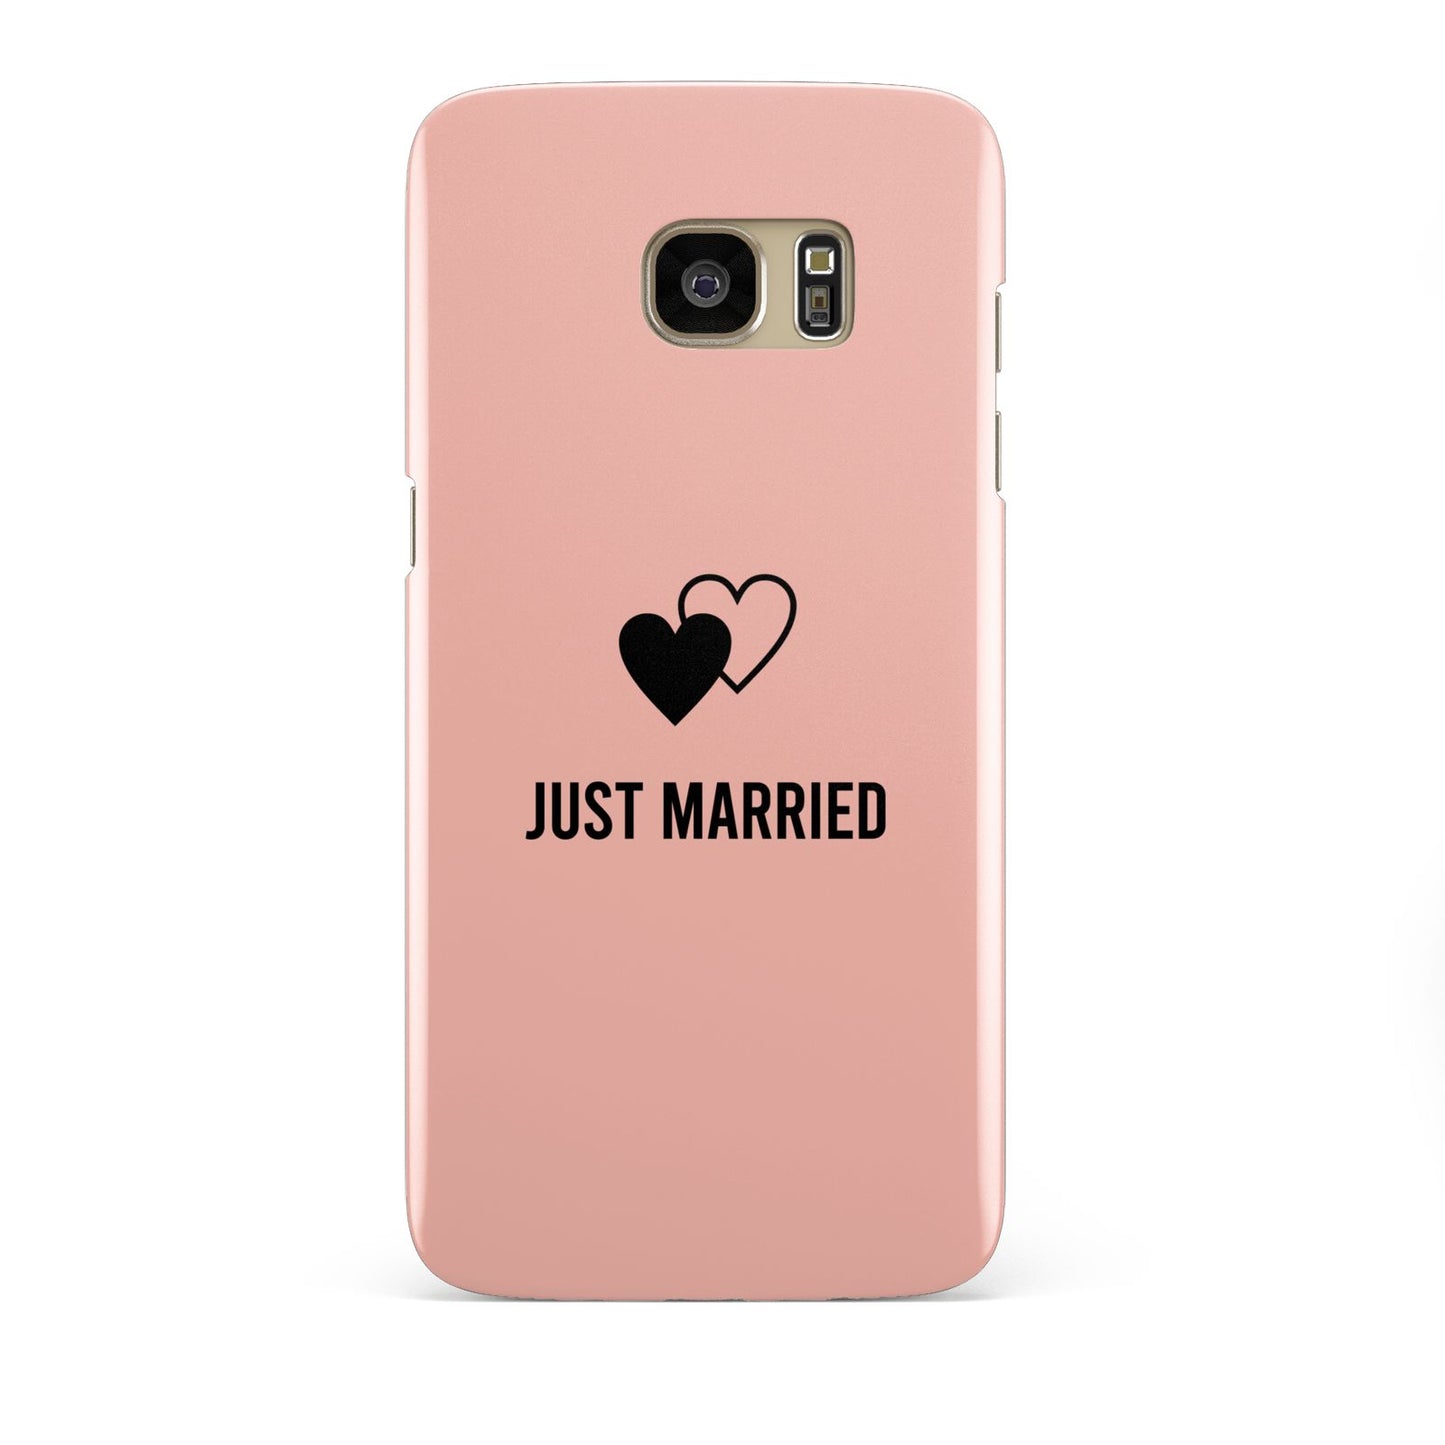 Just Married Samsung Galaxy S7 Edge Case